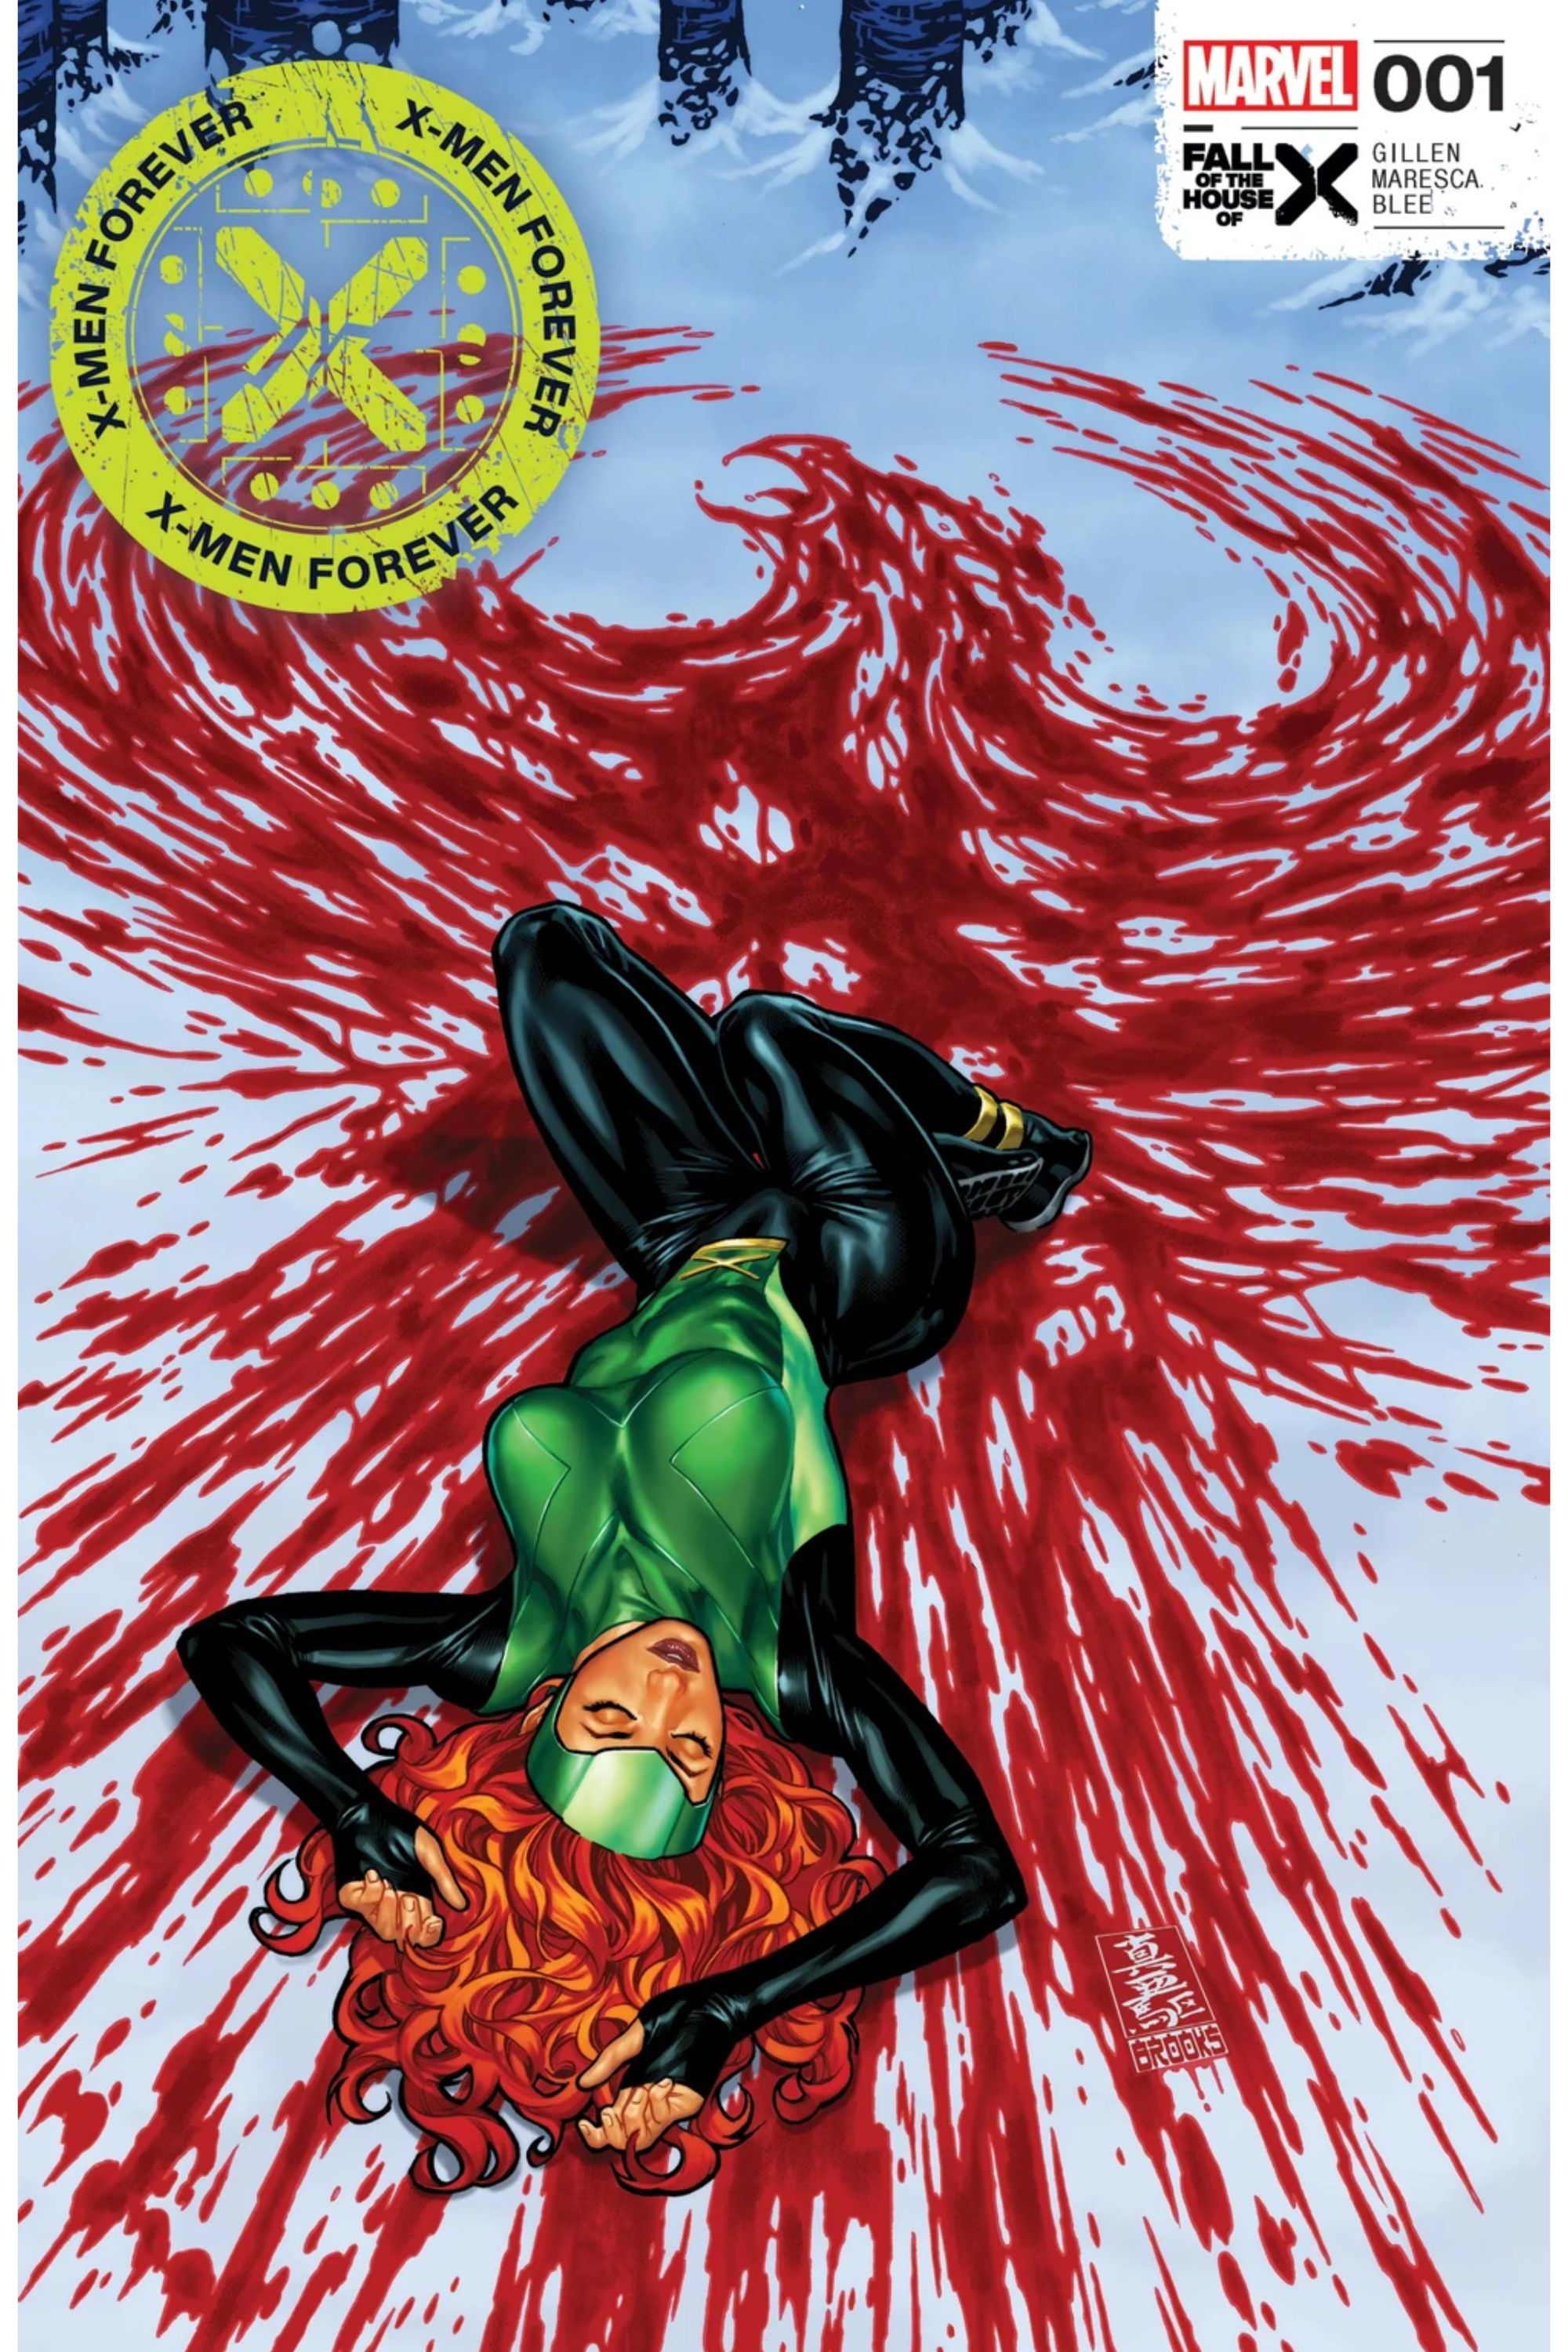 Jean Grey lays in the snow, surrounded by blood shaped like the Phoenix raptor